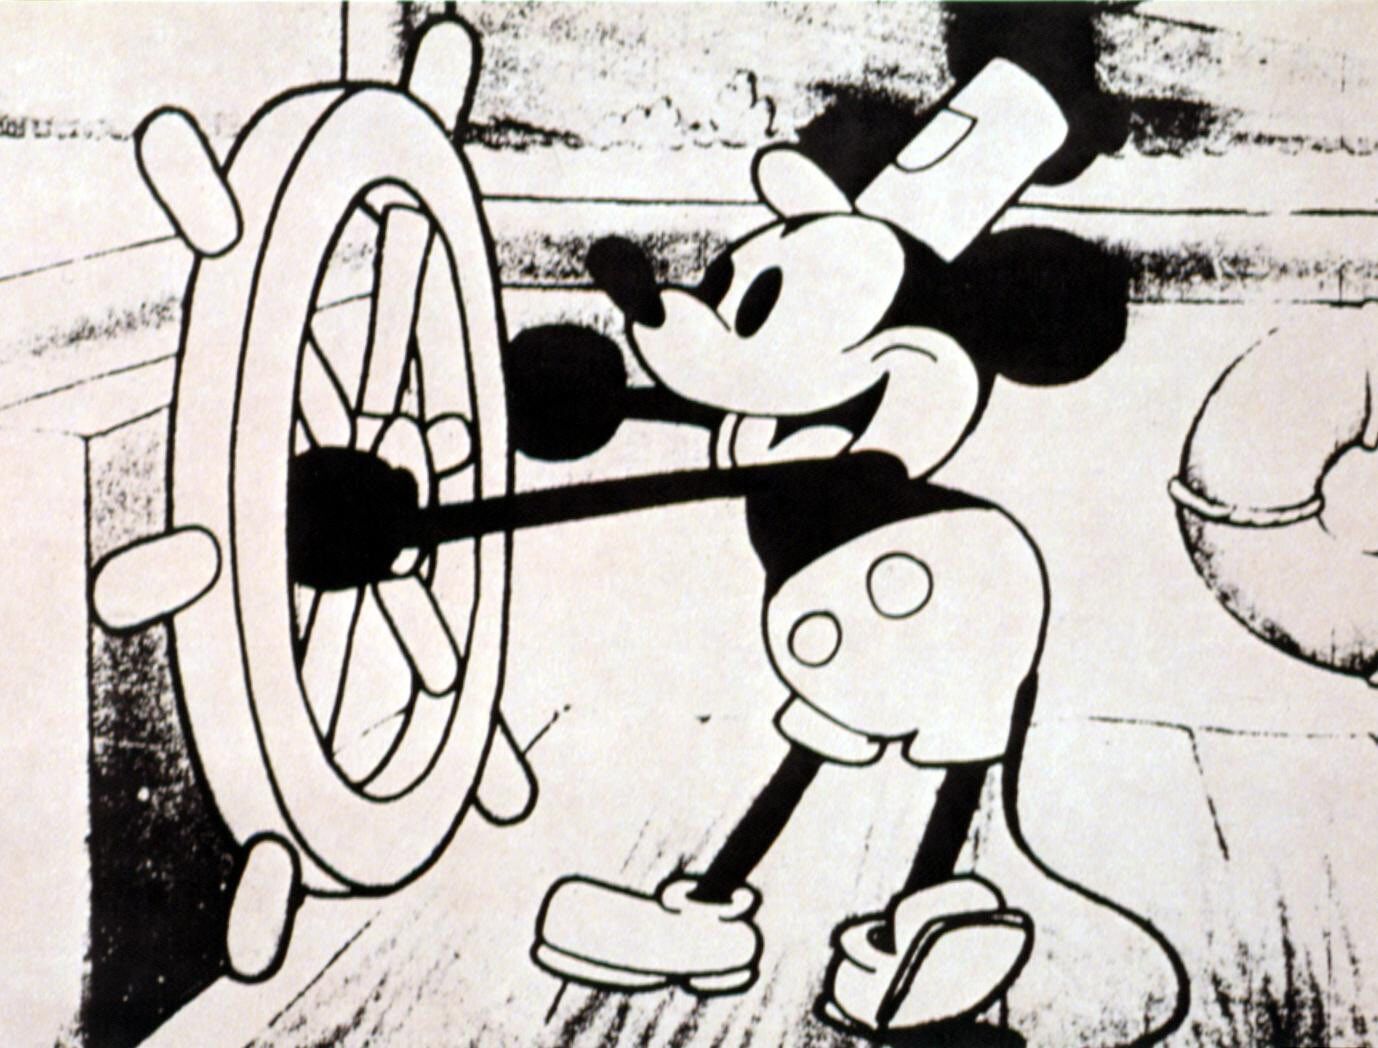 Straight Potatoes Make way Republicans threaten Disney over Mickey Mouse copyright - Los Angeles Times